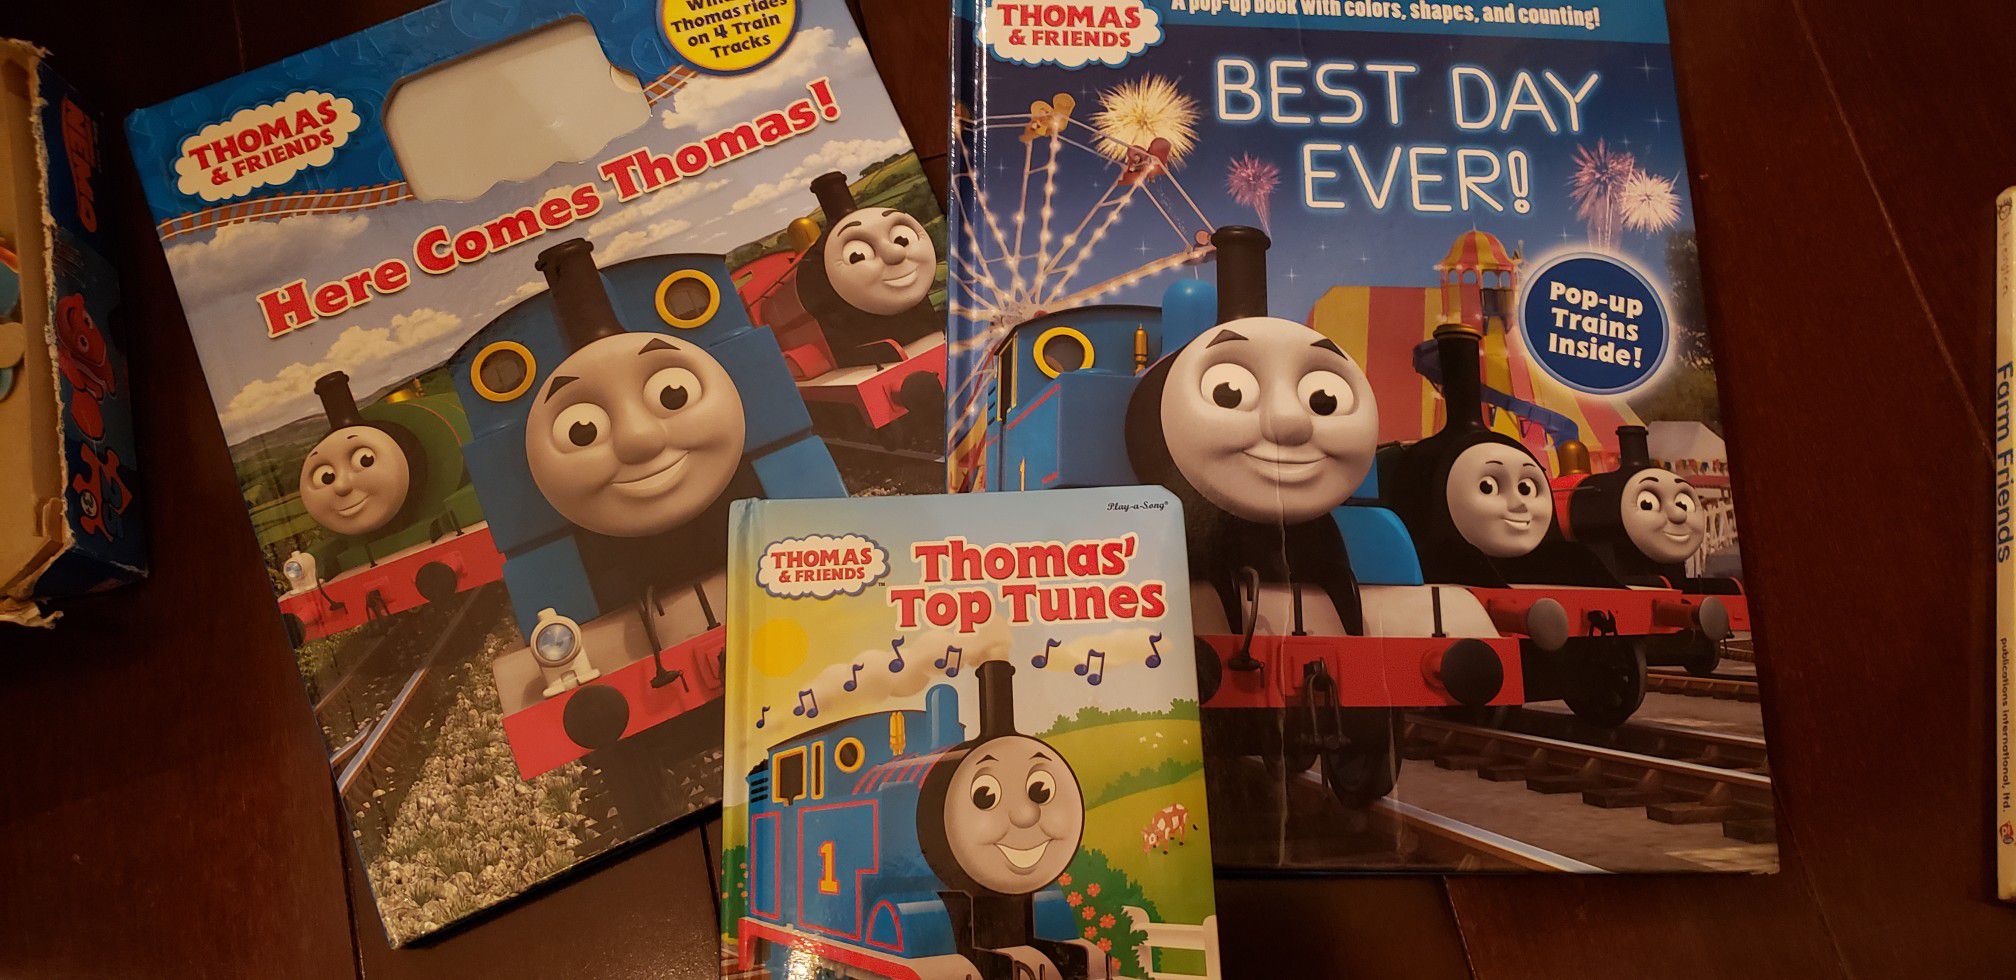 Thomas train books and hats and toys